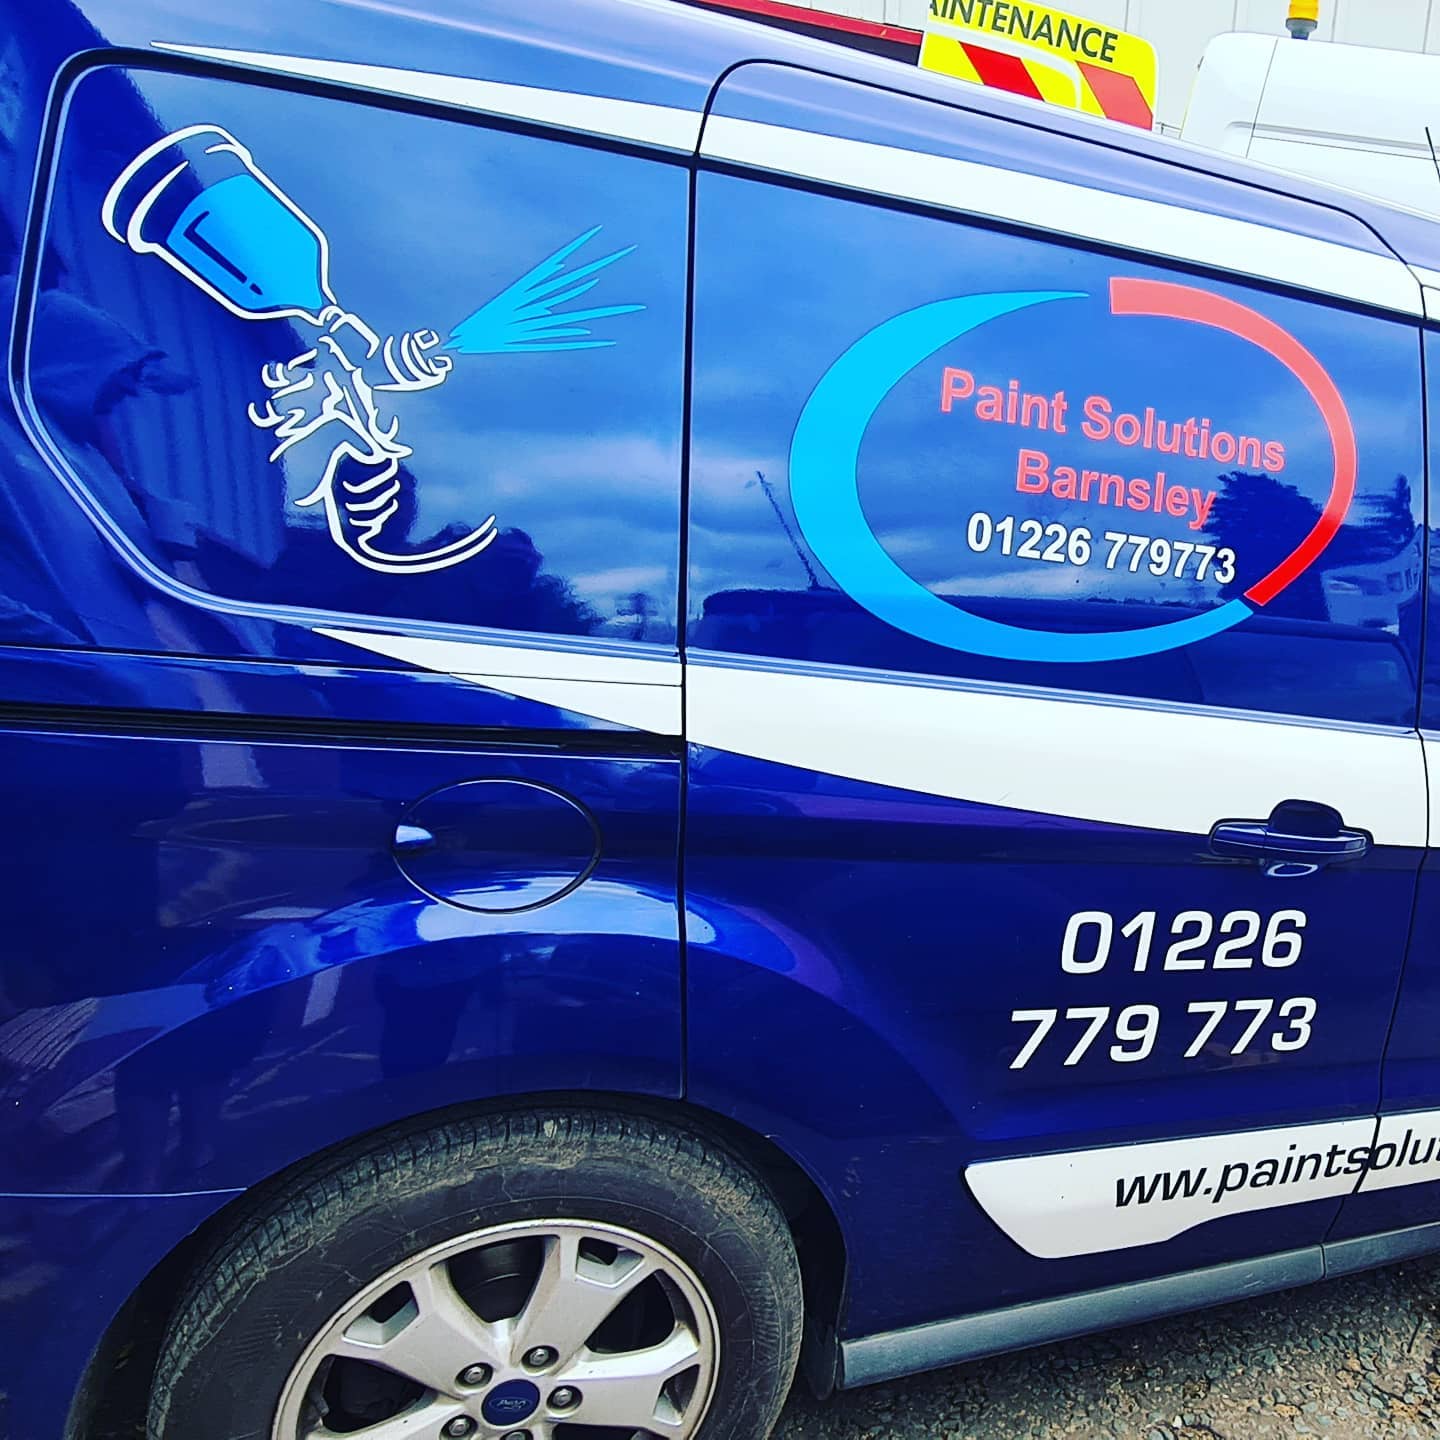 Business signs. Van sign writing by Vinyl Destination.